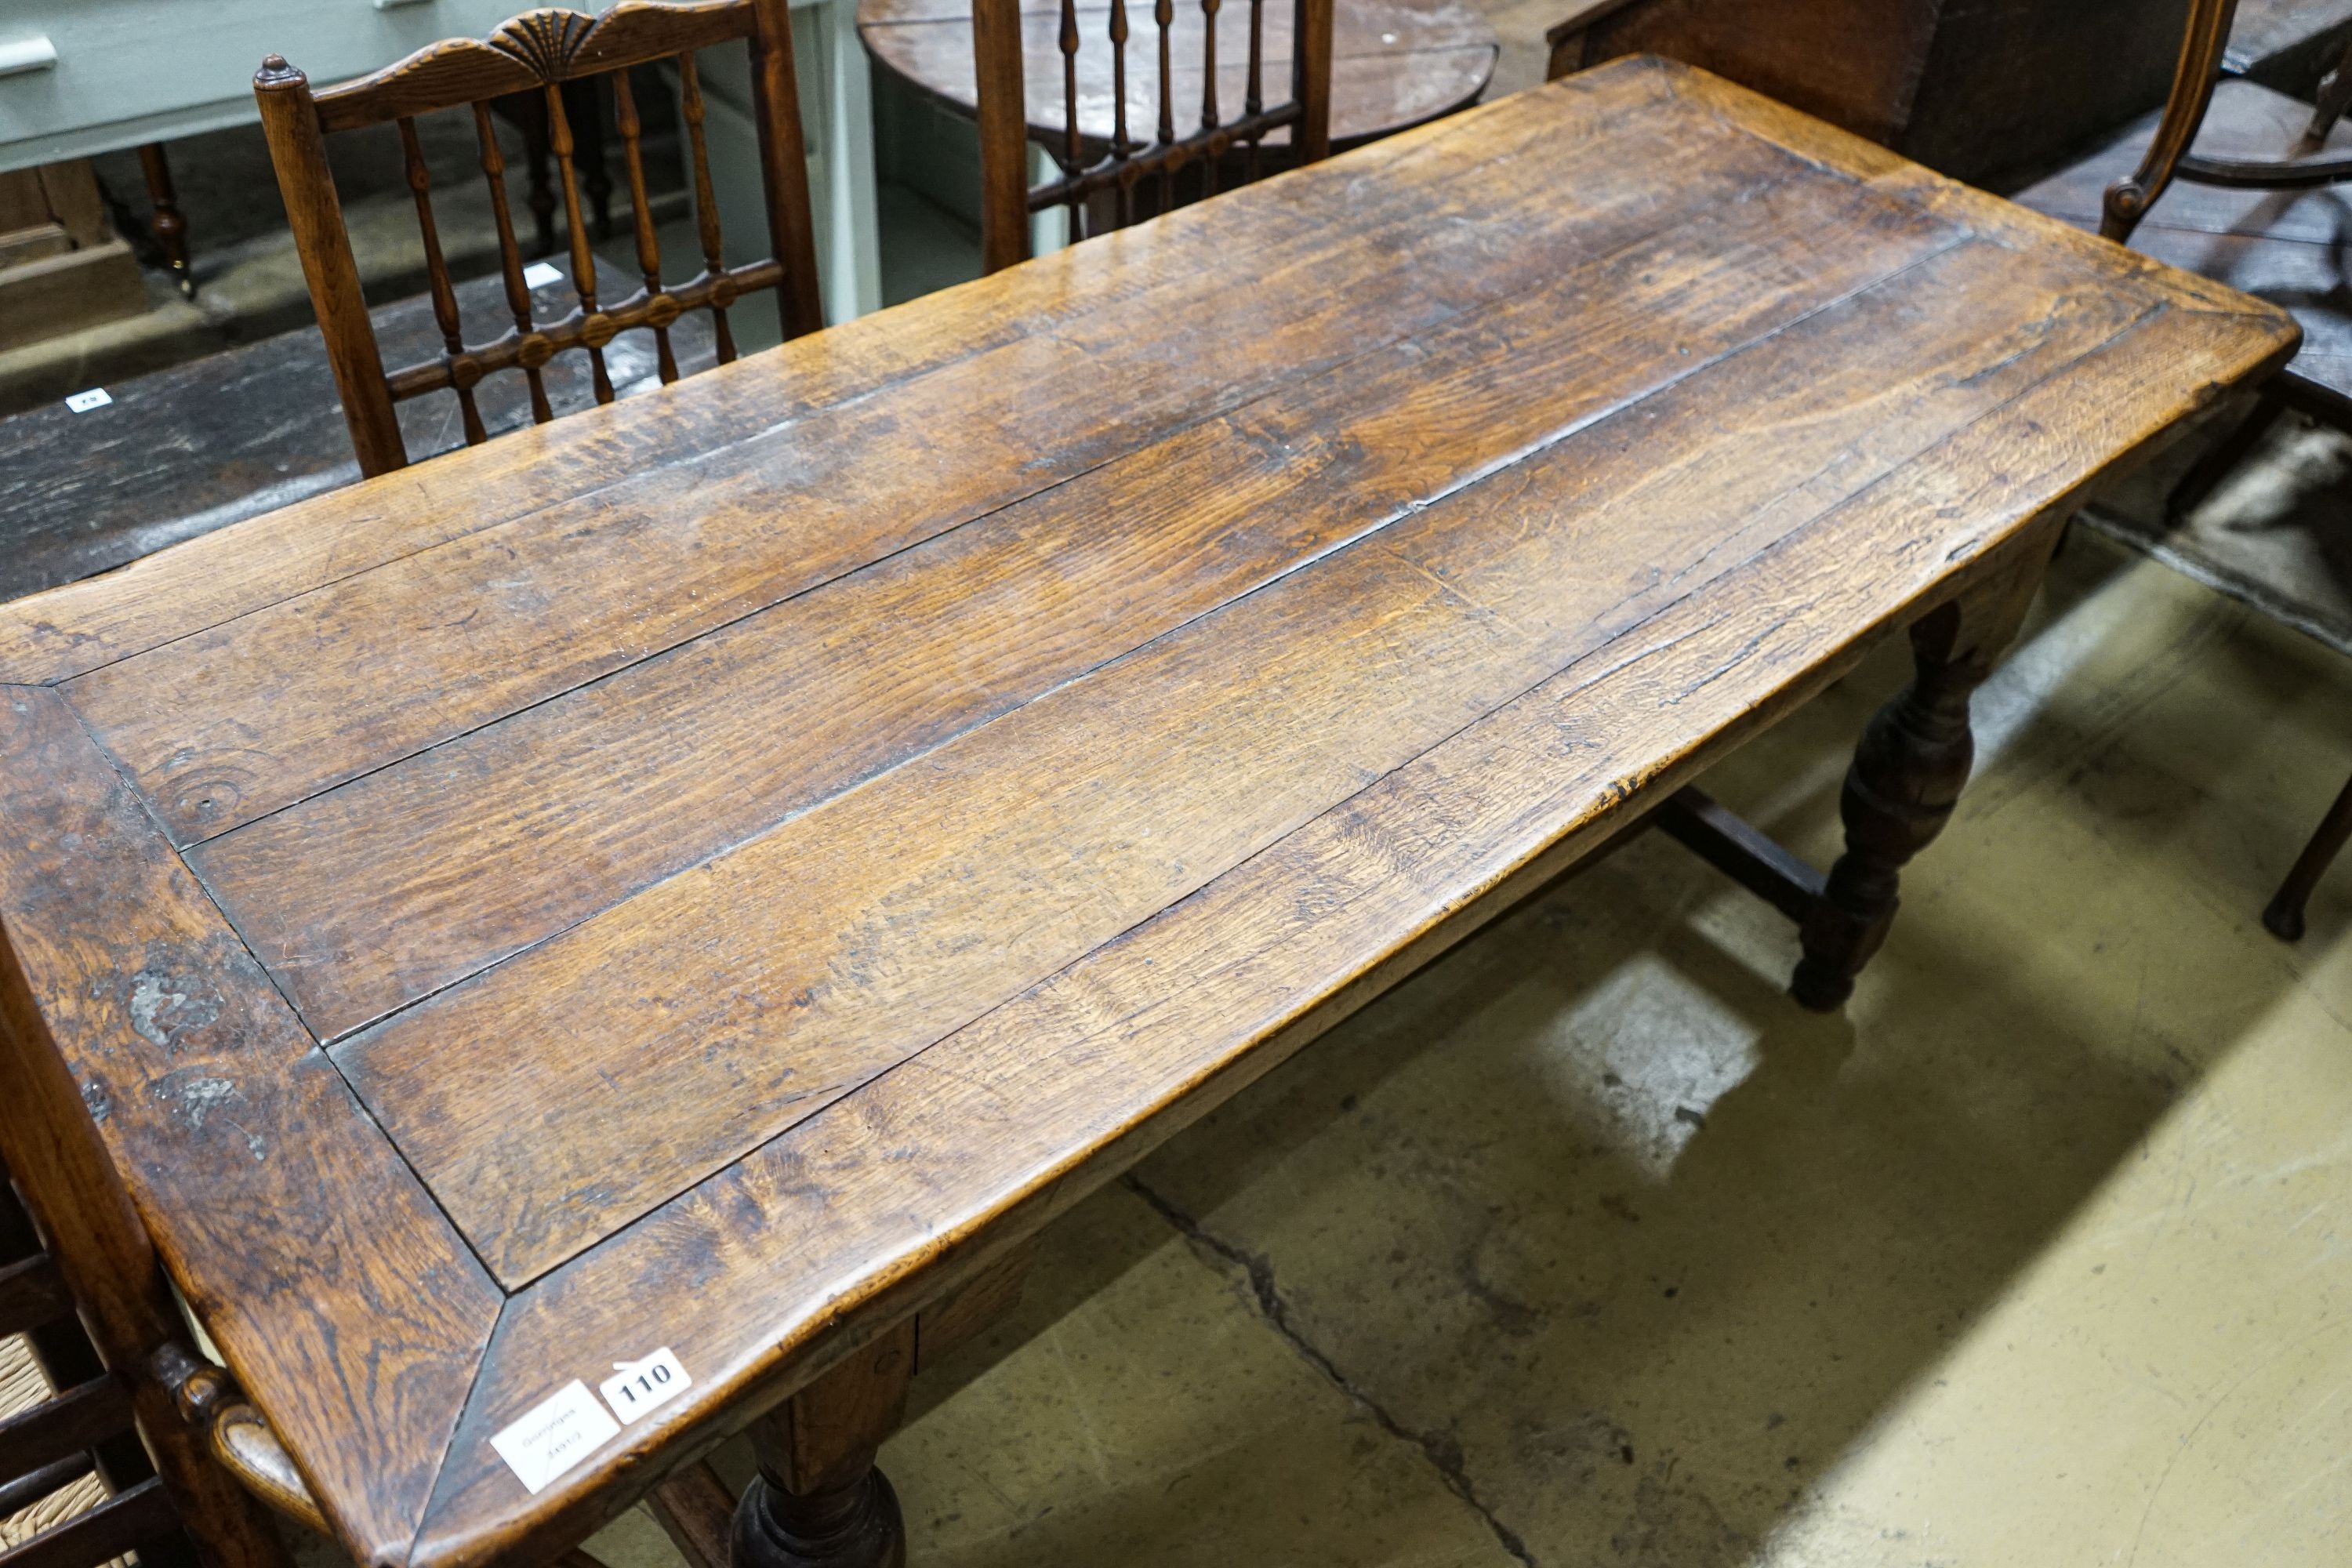 A 17th century style oak refectory table, with cup and cover legs and H stretcher, length 177, depth 74cm, height 77cm